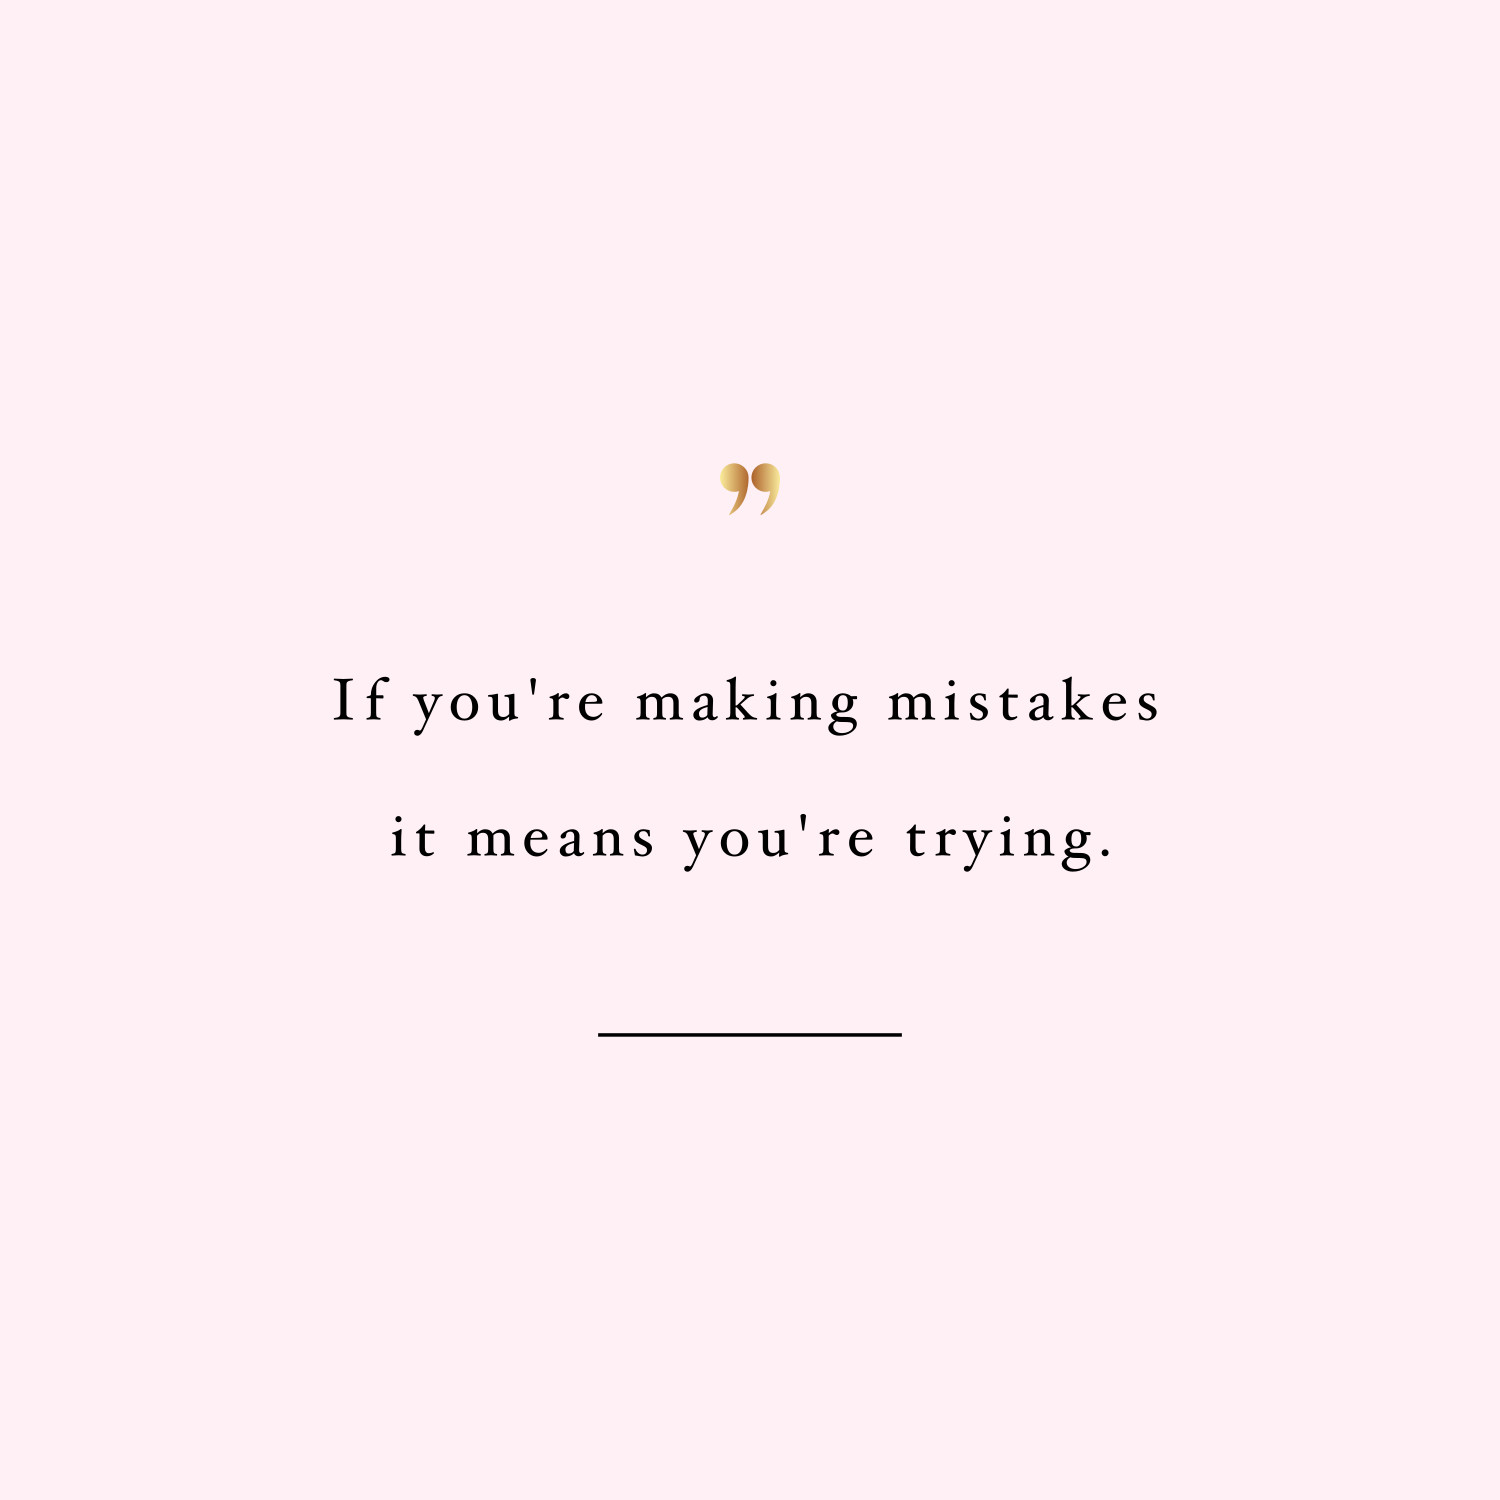 Mistakes are part of the journey! Browse our collection of motivational exercise quotes and get instant health and fitness inspiration. Transform positive thoughts into positive actions and get fit, healthy and happy! https://www.spotebi.com/workout-motivation/mistakes-are-part-of-the-journey-health-and-fitness-inspiration-quote/